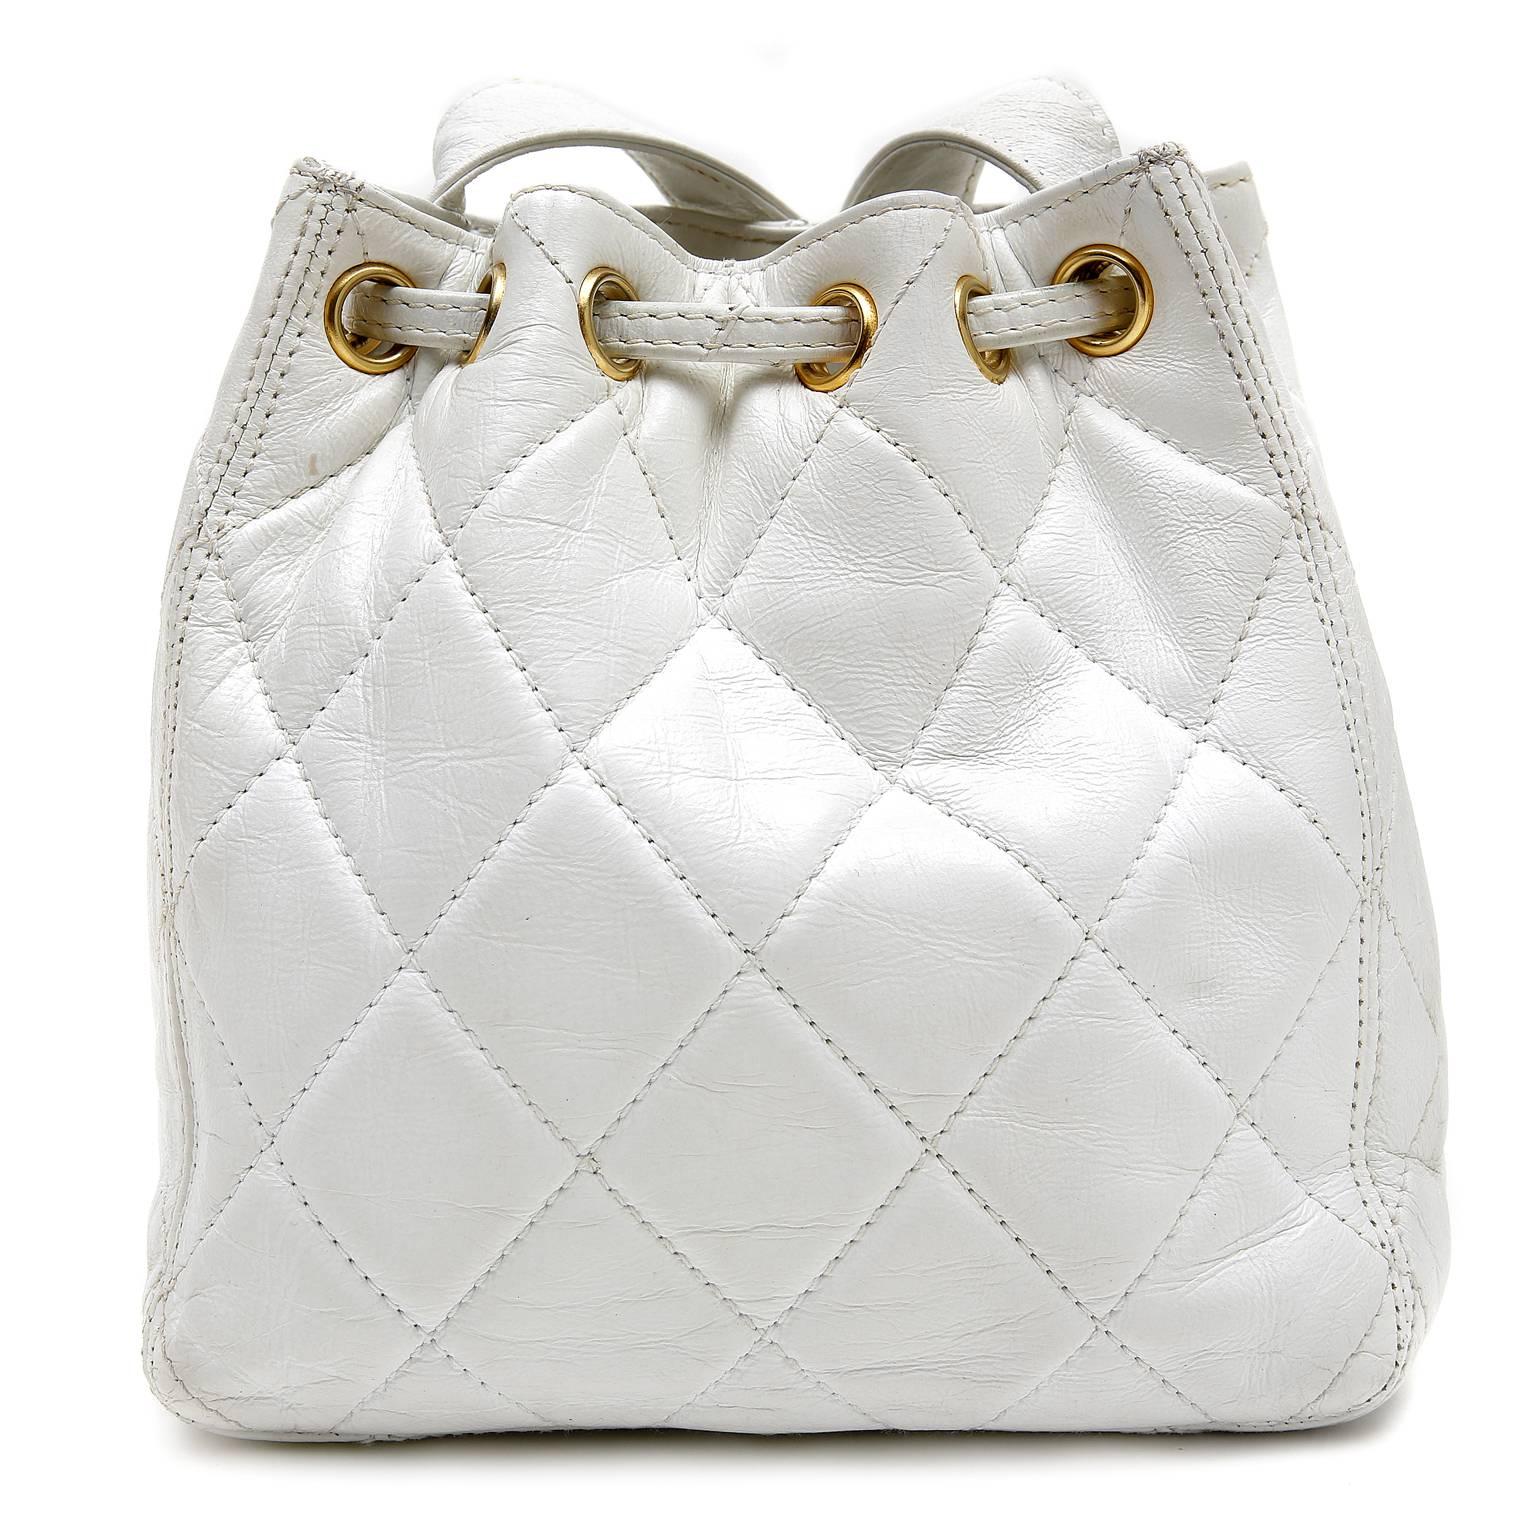 Chanel White Lambskin Drawstring Bucket Bag is in nearly pristine condition.  Petite in stature, the classic bucket style is perfect for traveling with just the essentials. 
 
White lambskin is quilted in signature Chanel diamond stitched pattern.